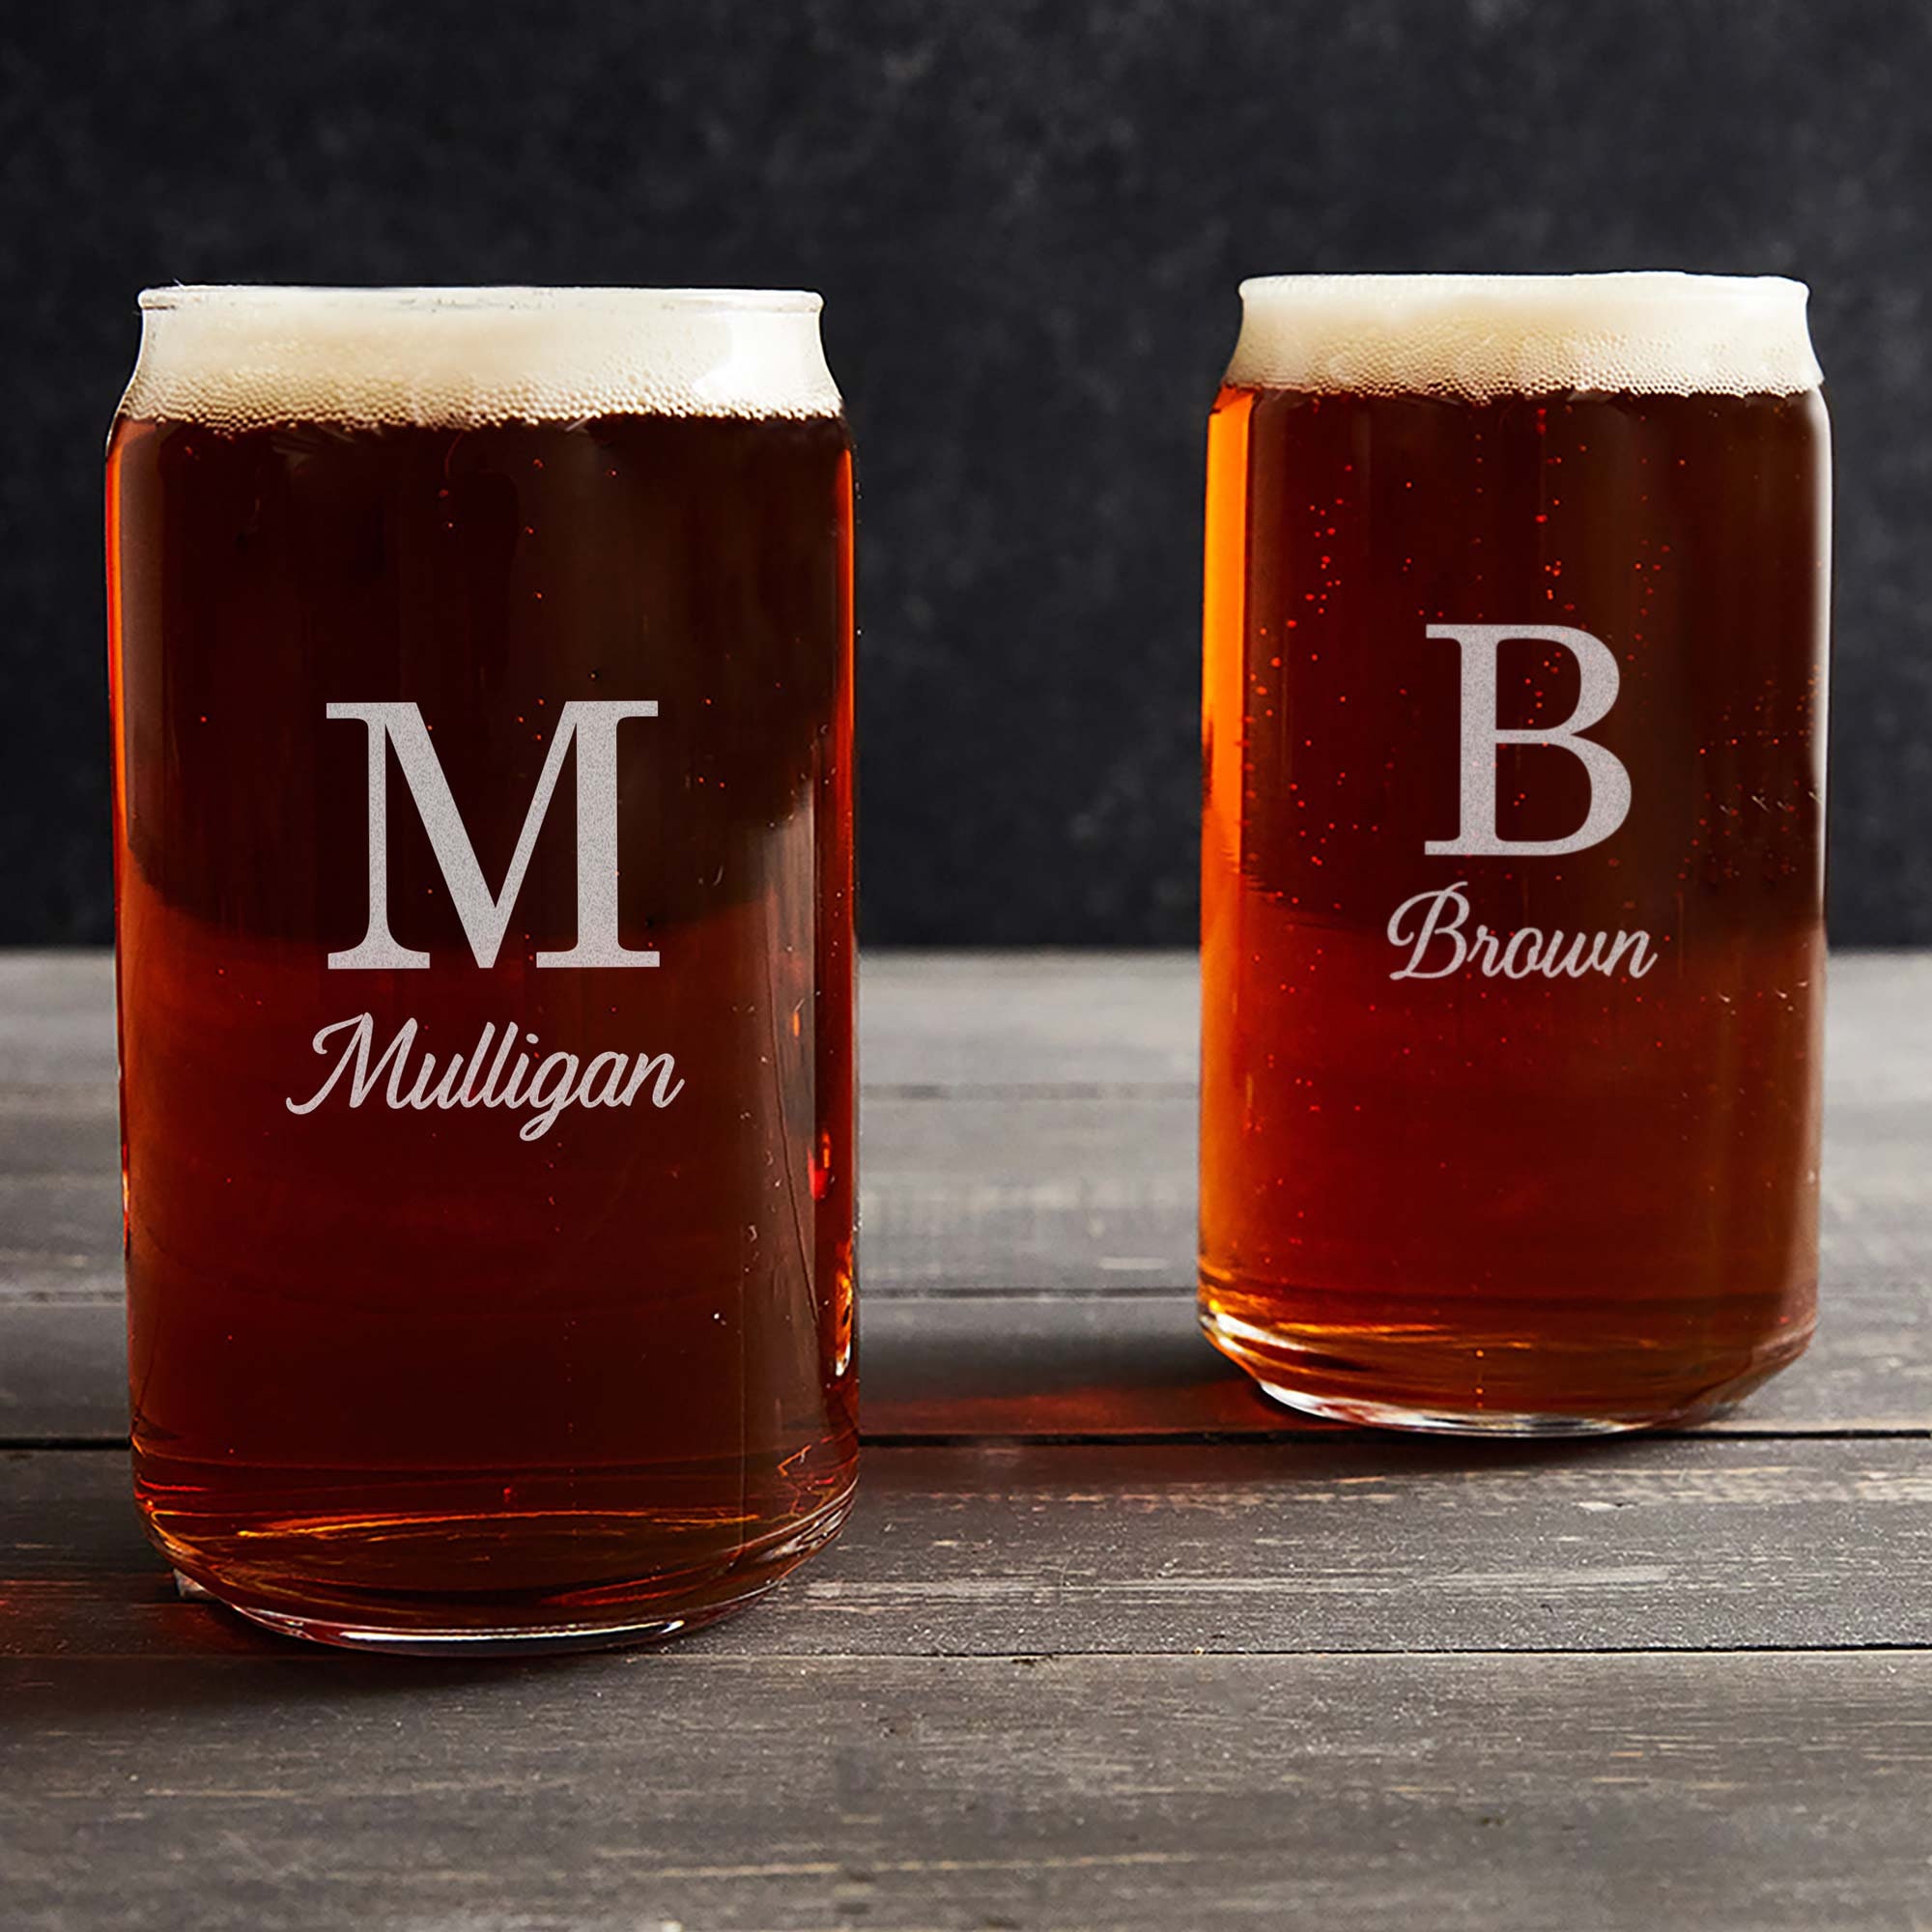 Your Name Custom Glass Beer Can Glass Cup Vertical –